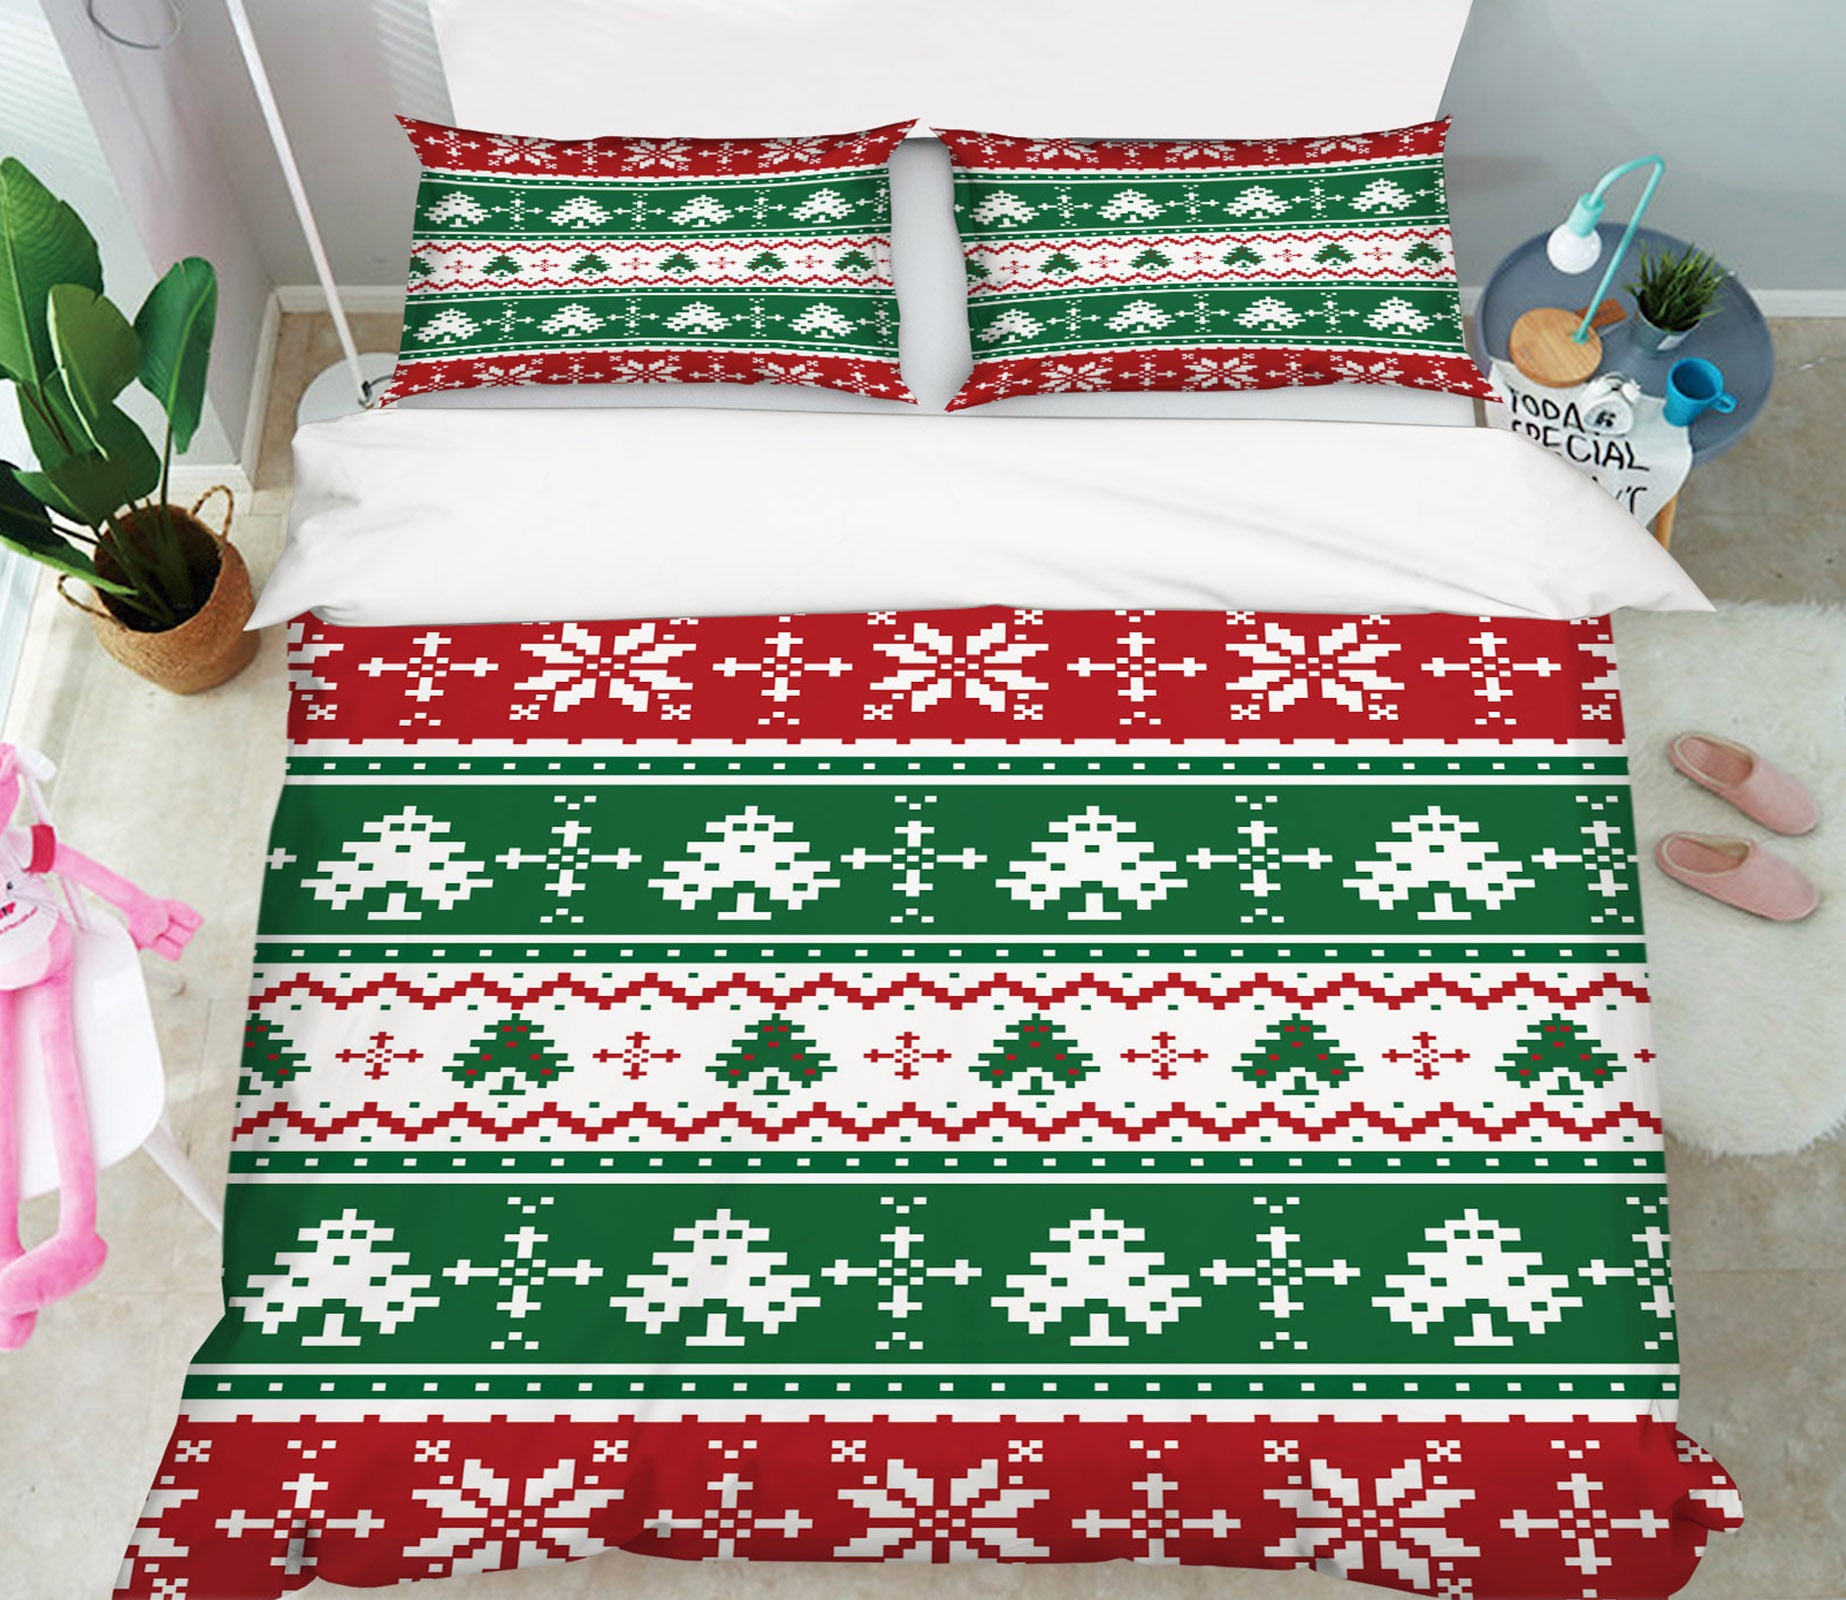 3D Red Green Tree Snowflake Pattern 51155 Christmas Quilt Duvet Cover Xmas Bed Pillowcases